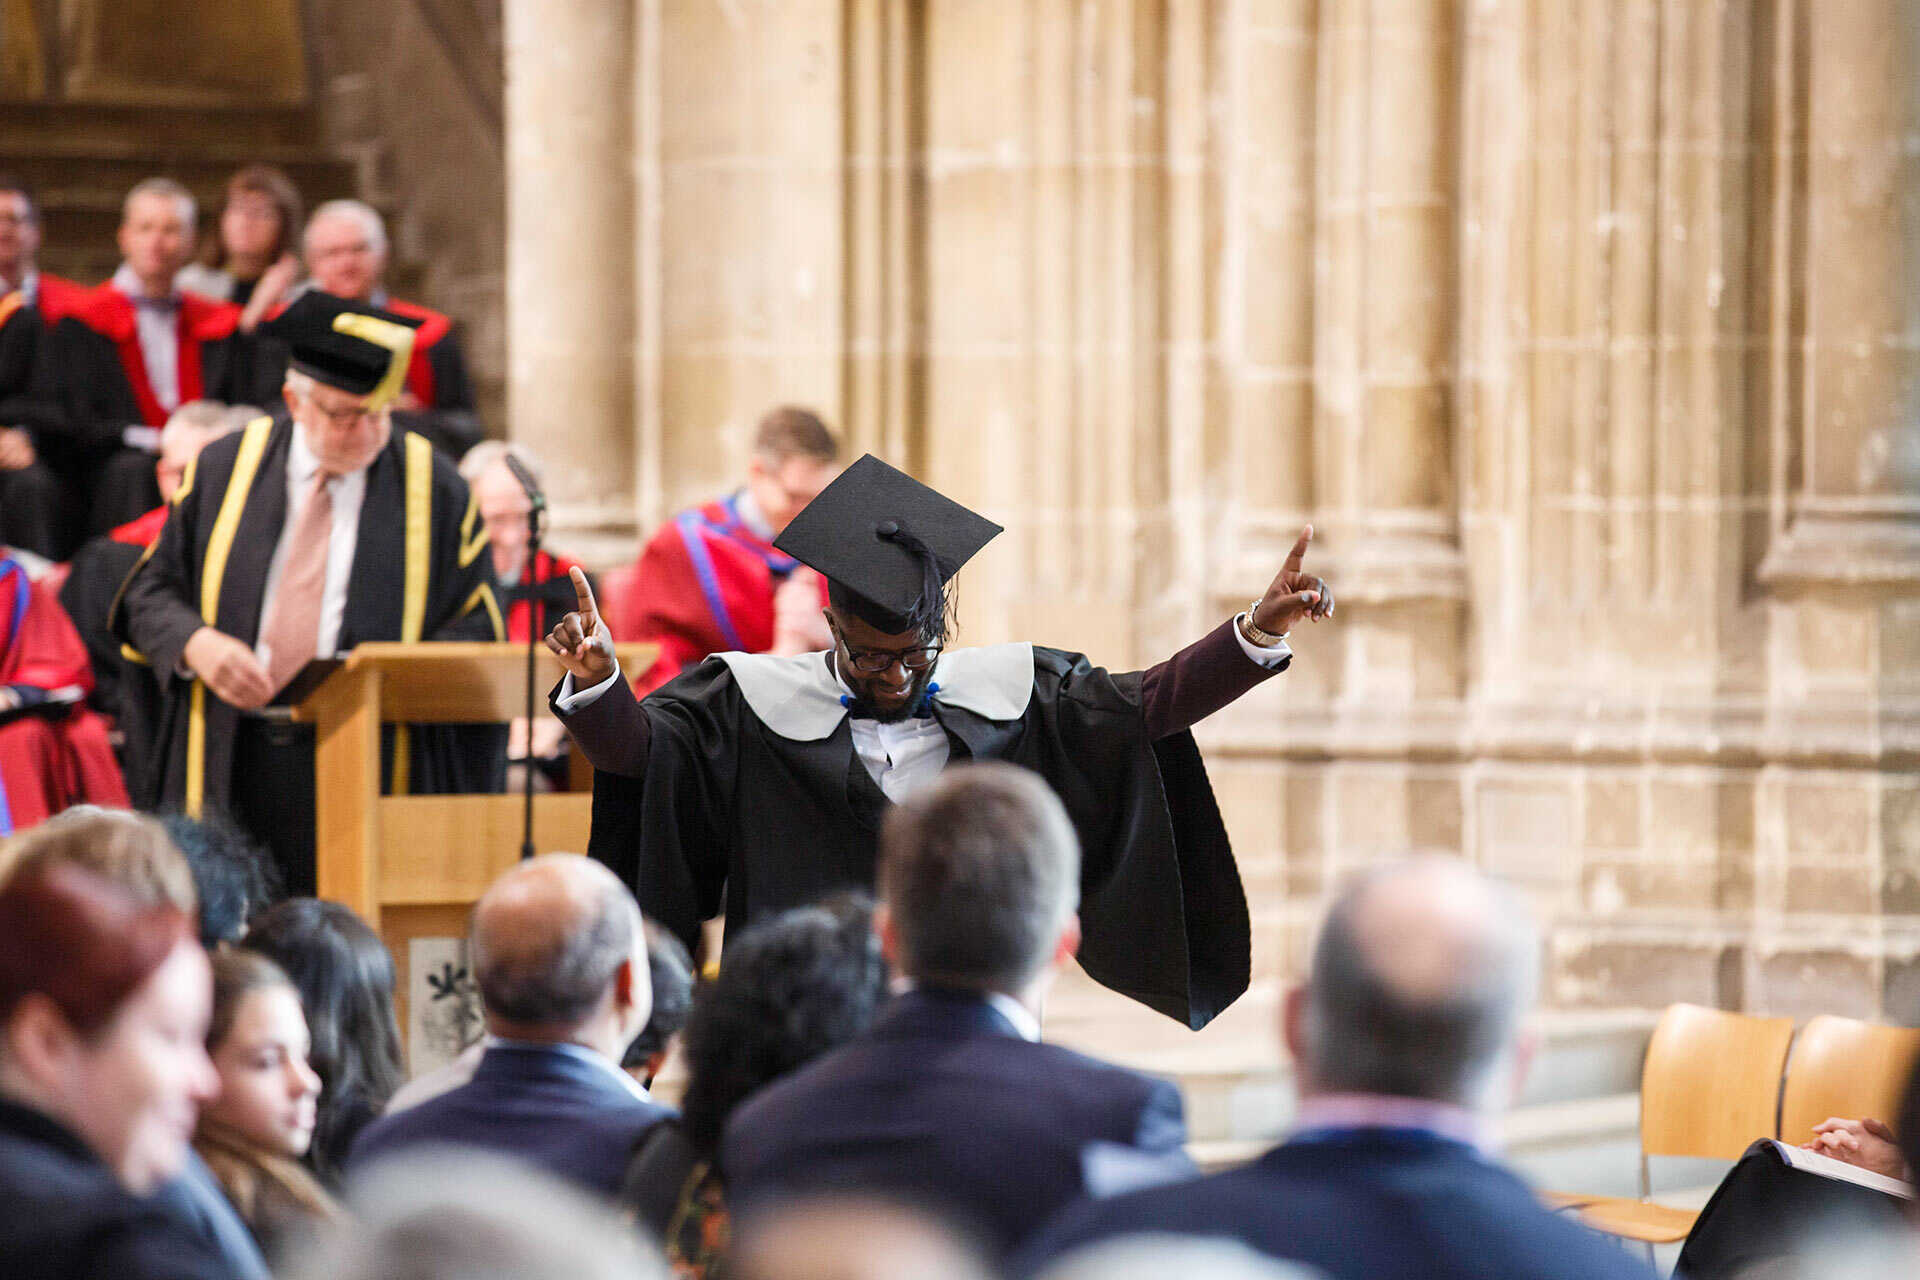 Student walking down the nave of Canterbury Cathedral, celebrating his achievement